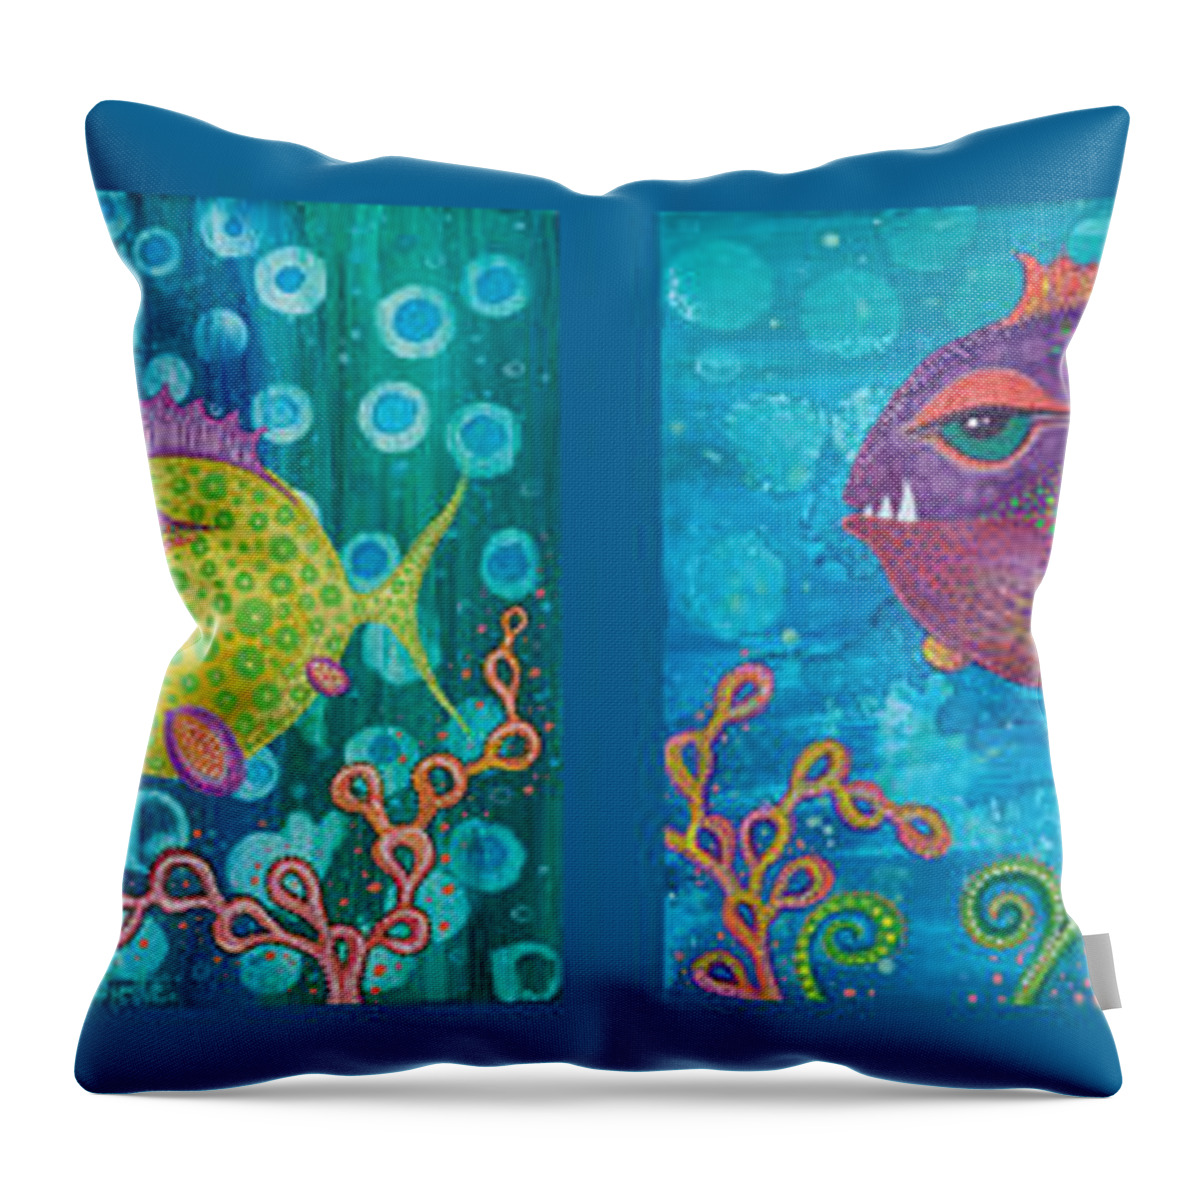 Fish School Throw Pillow featuring the digital art Fish School by Tanielle Childers